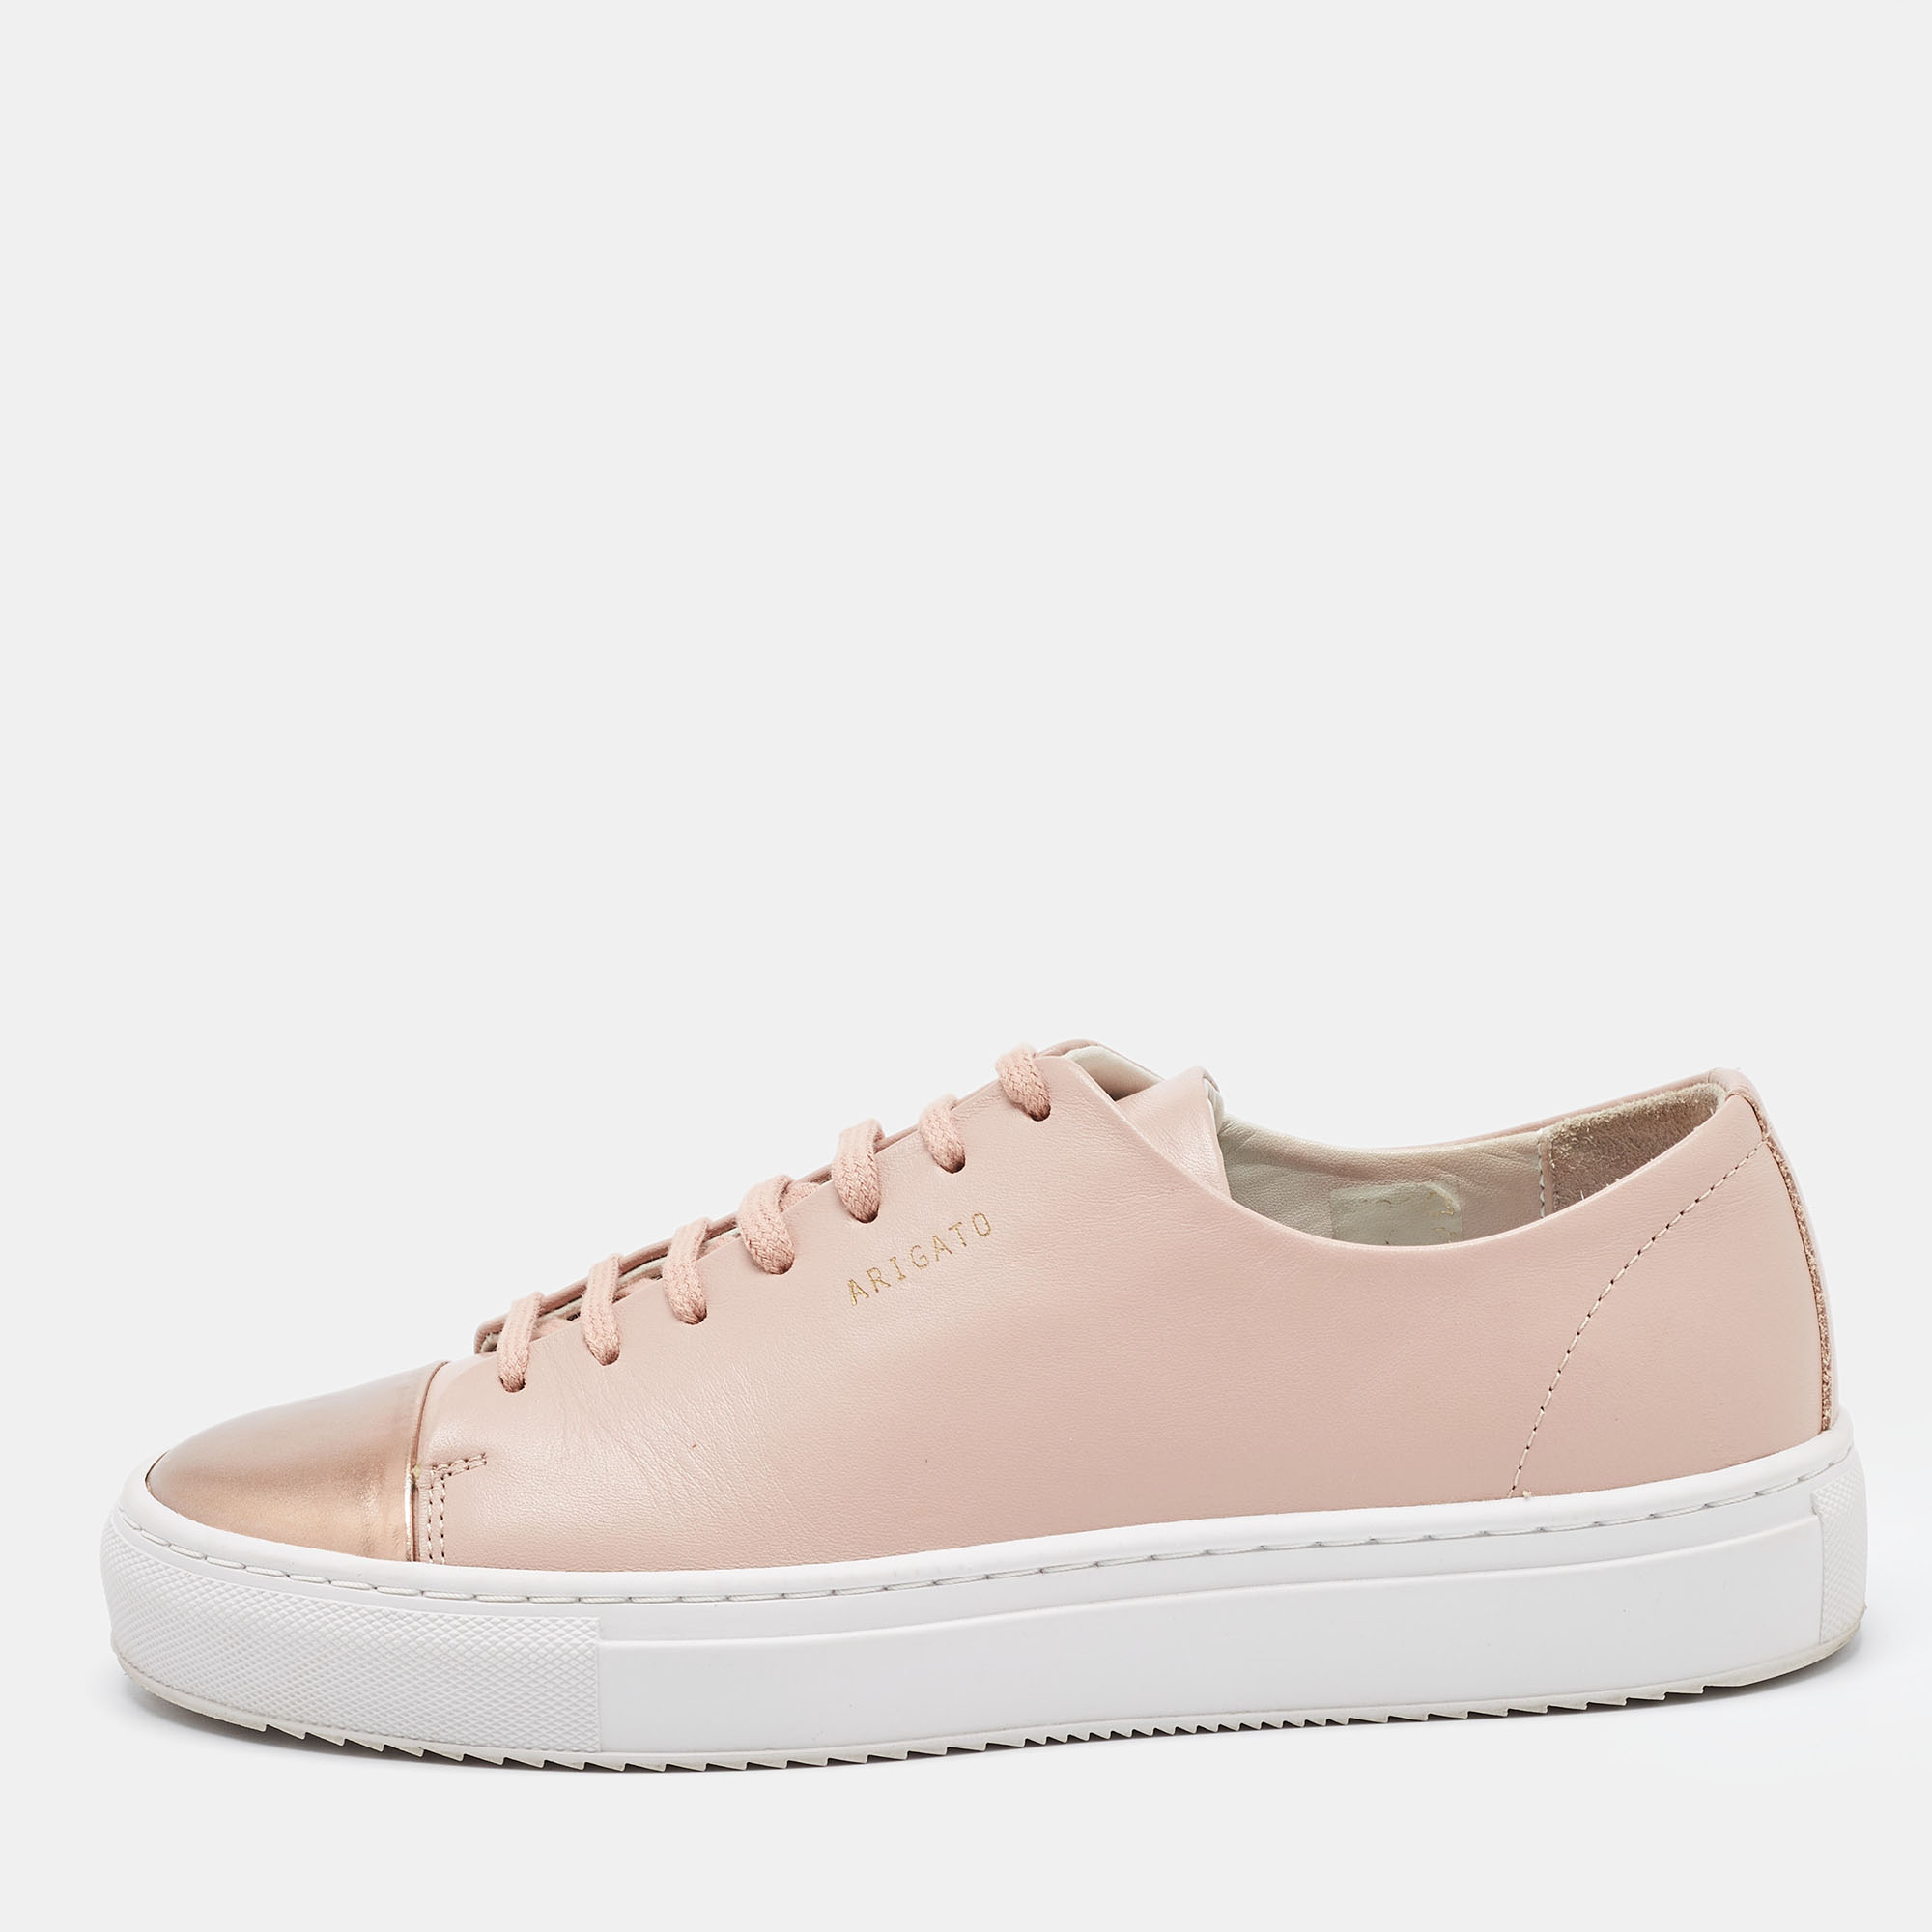 Axel Arigato Pink Leather Clean Low Top Sneakers Size 38